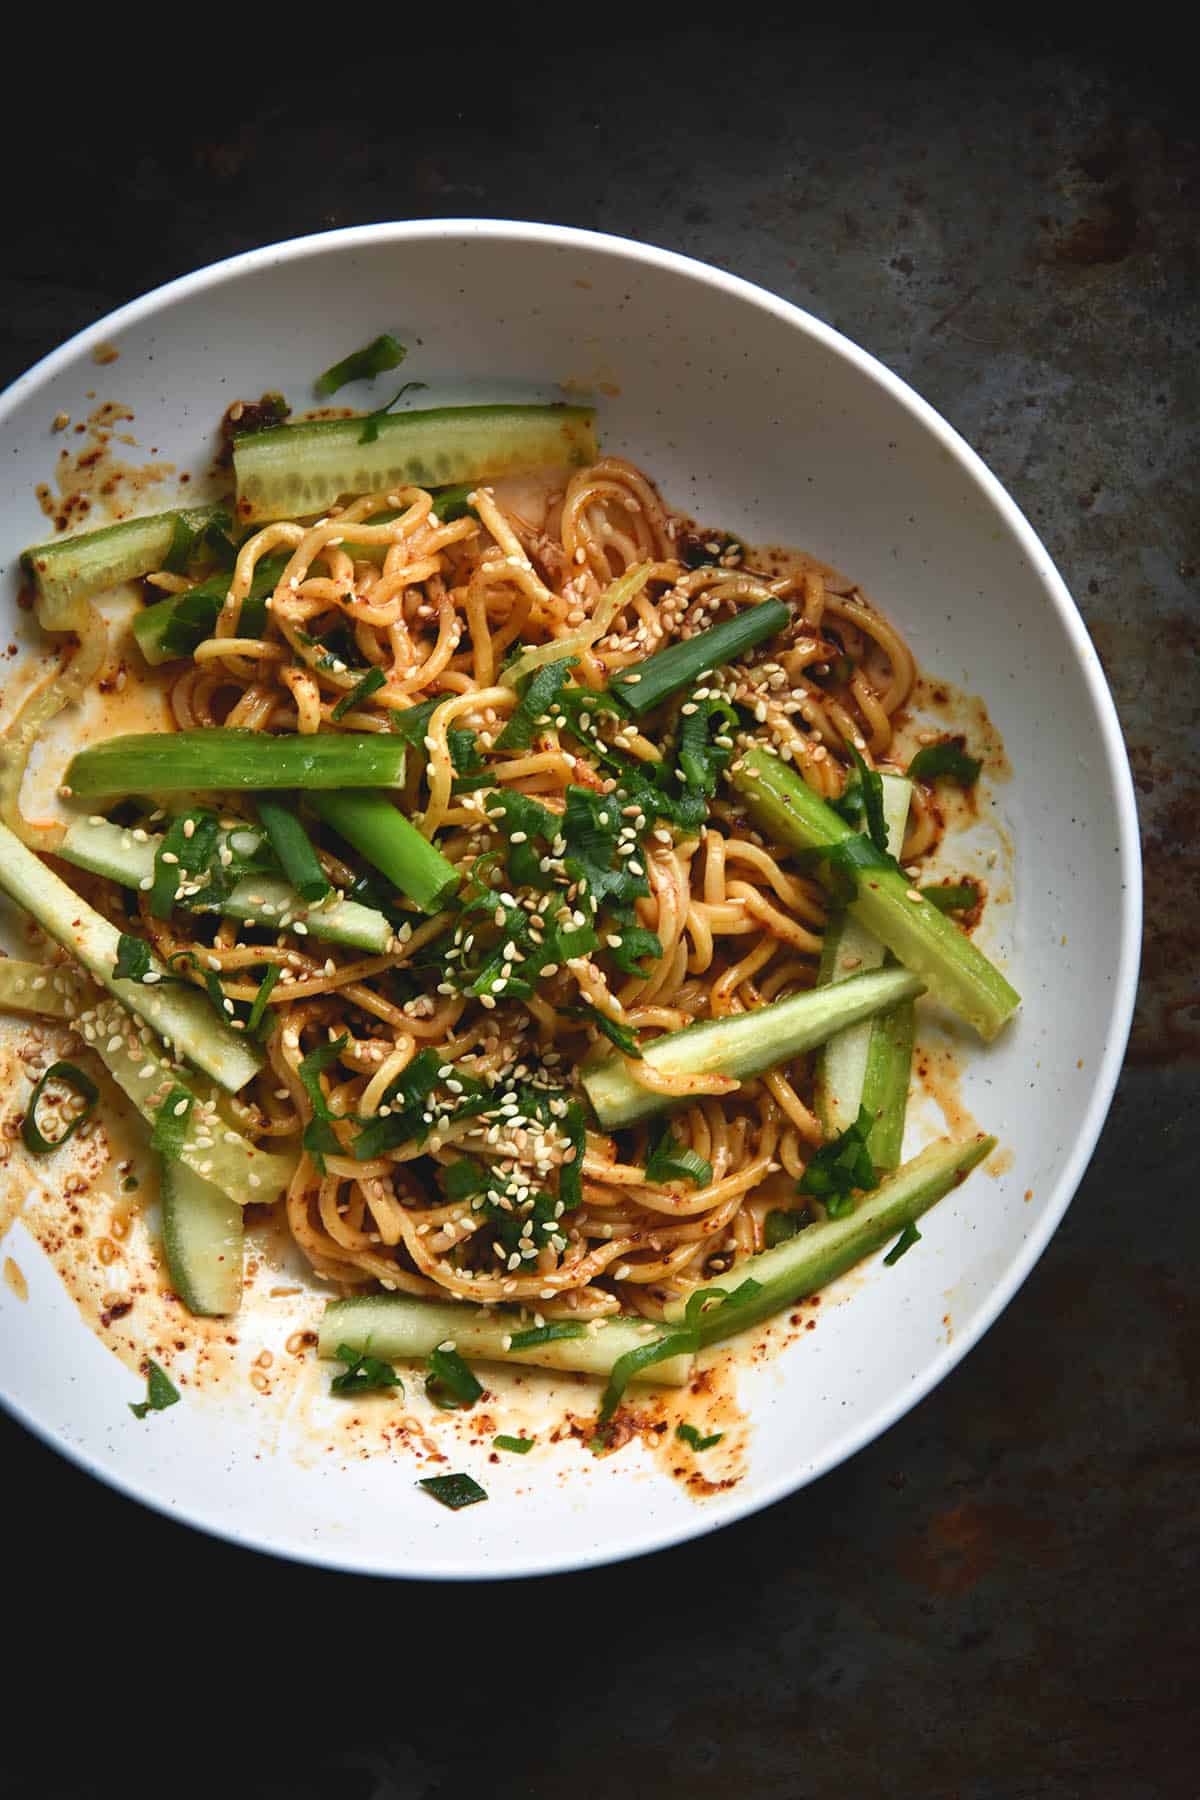 An aerial view of a white bowl of FODMAP friendly chilli oil noodles. The noodles are casually strewn about in the bowl, and topped with cucumber batons, spring onion greens and sesame seeds. The bowl sits atop a dark grey steel backdrop, which contrasts with the white bowl and vibrant chilli red tinted hue of the noodles